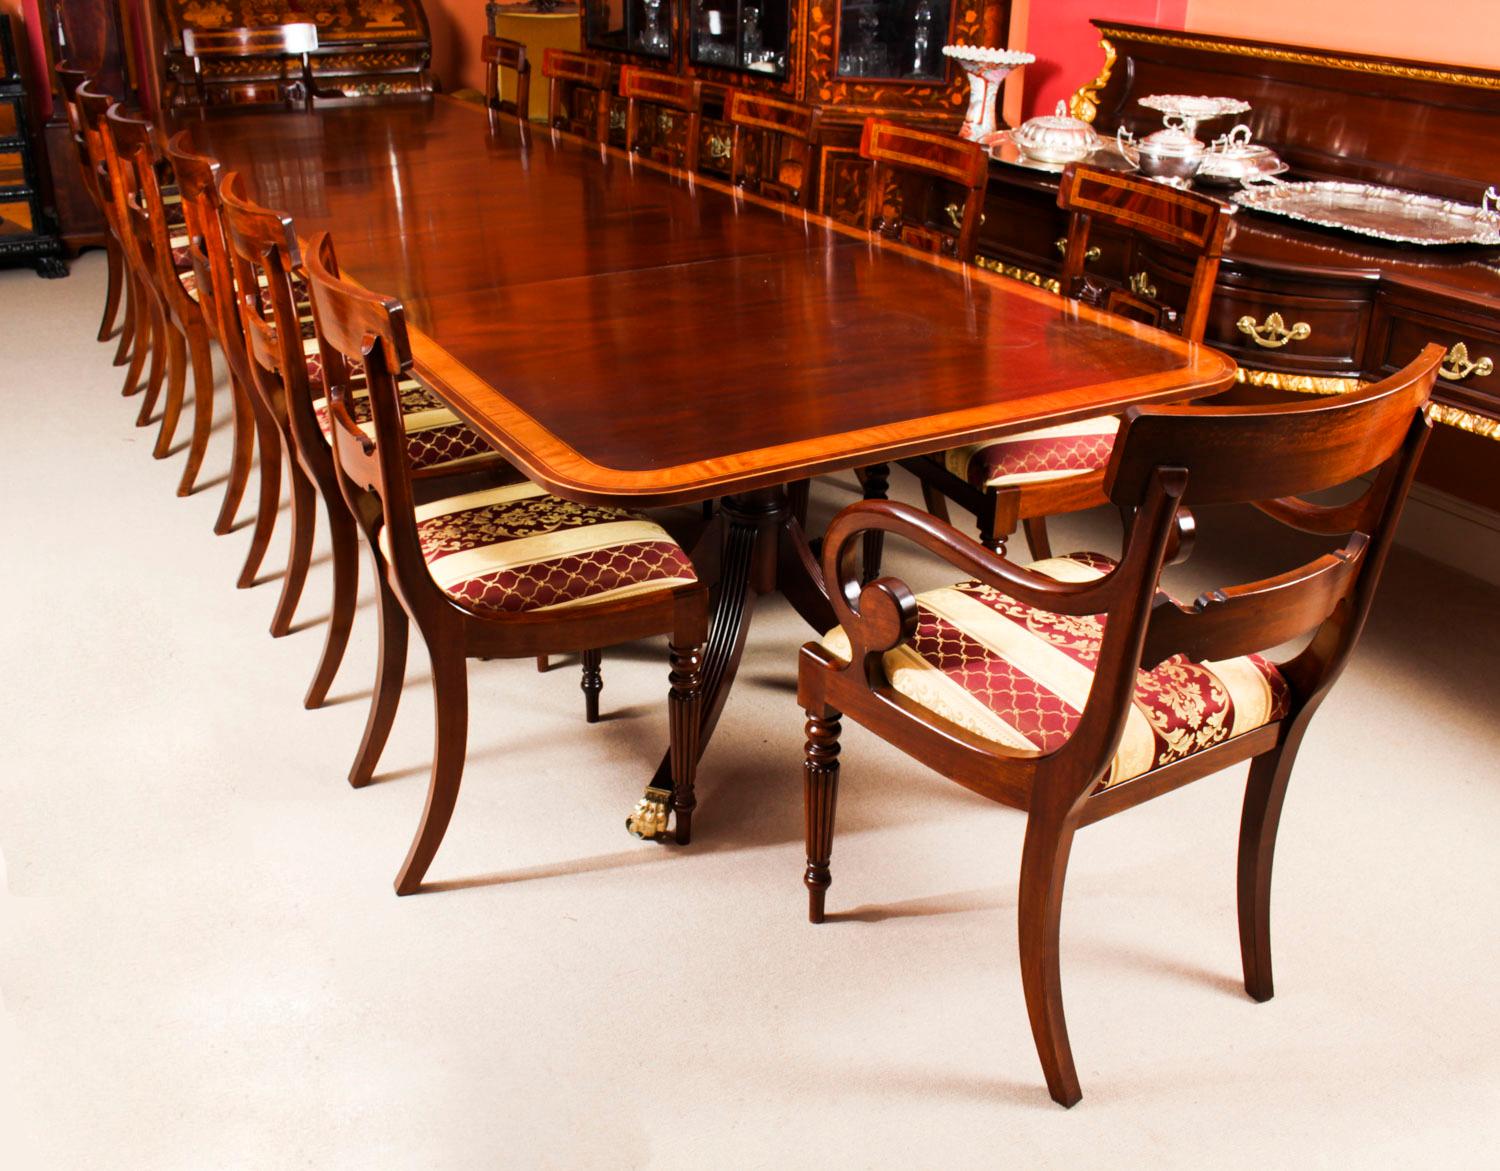 This is a superb antique 14ft Regency Revival dining table, crafted in flame mahogany and featuring superb satinwood crossbanded decoration, and dating from the late 19th century.

Capable of seating fourteen people in Regal comfort it is an